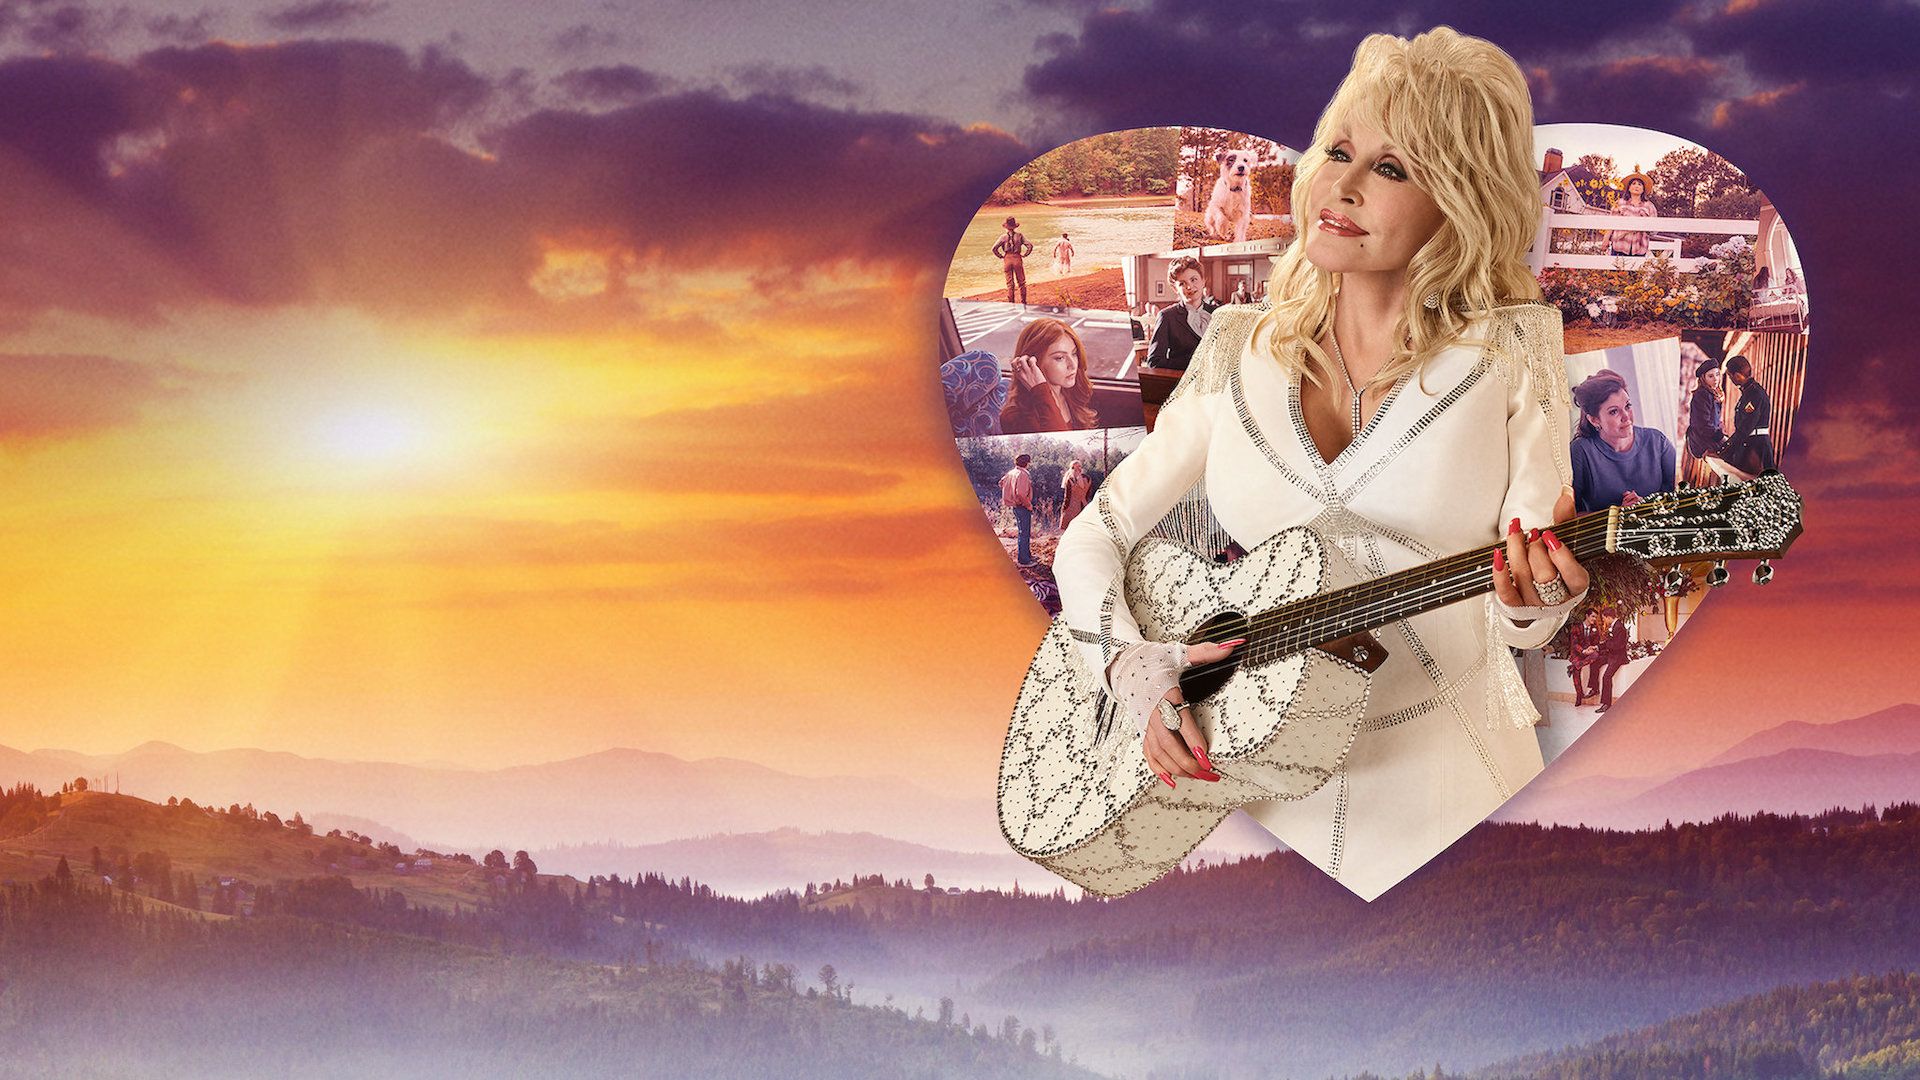 Dolly Parton's Heartstrings background